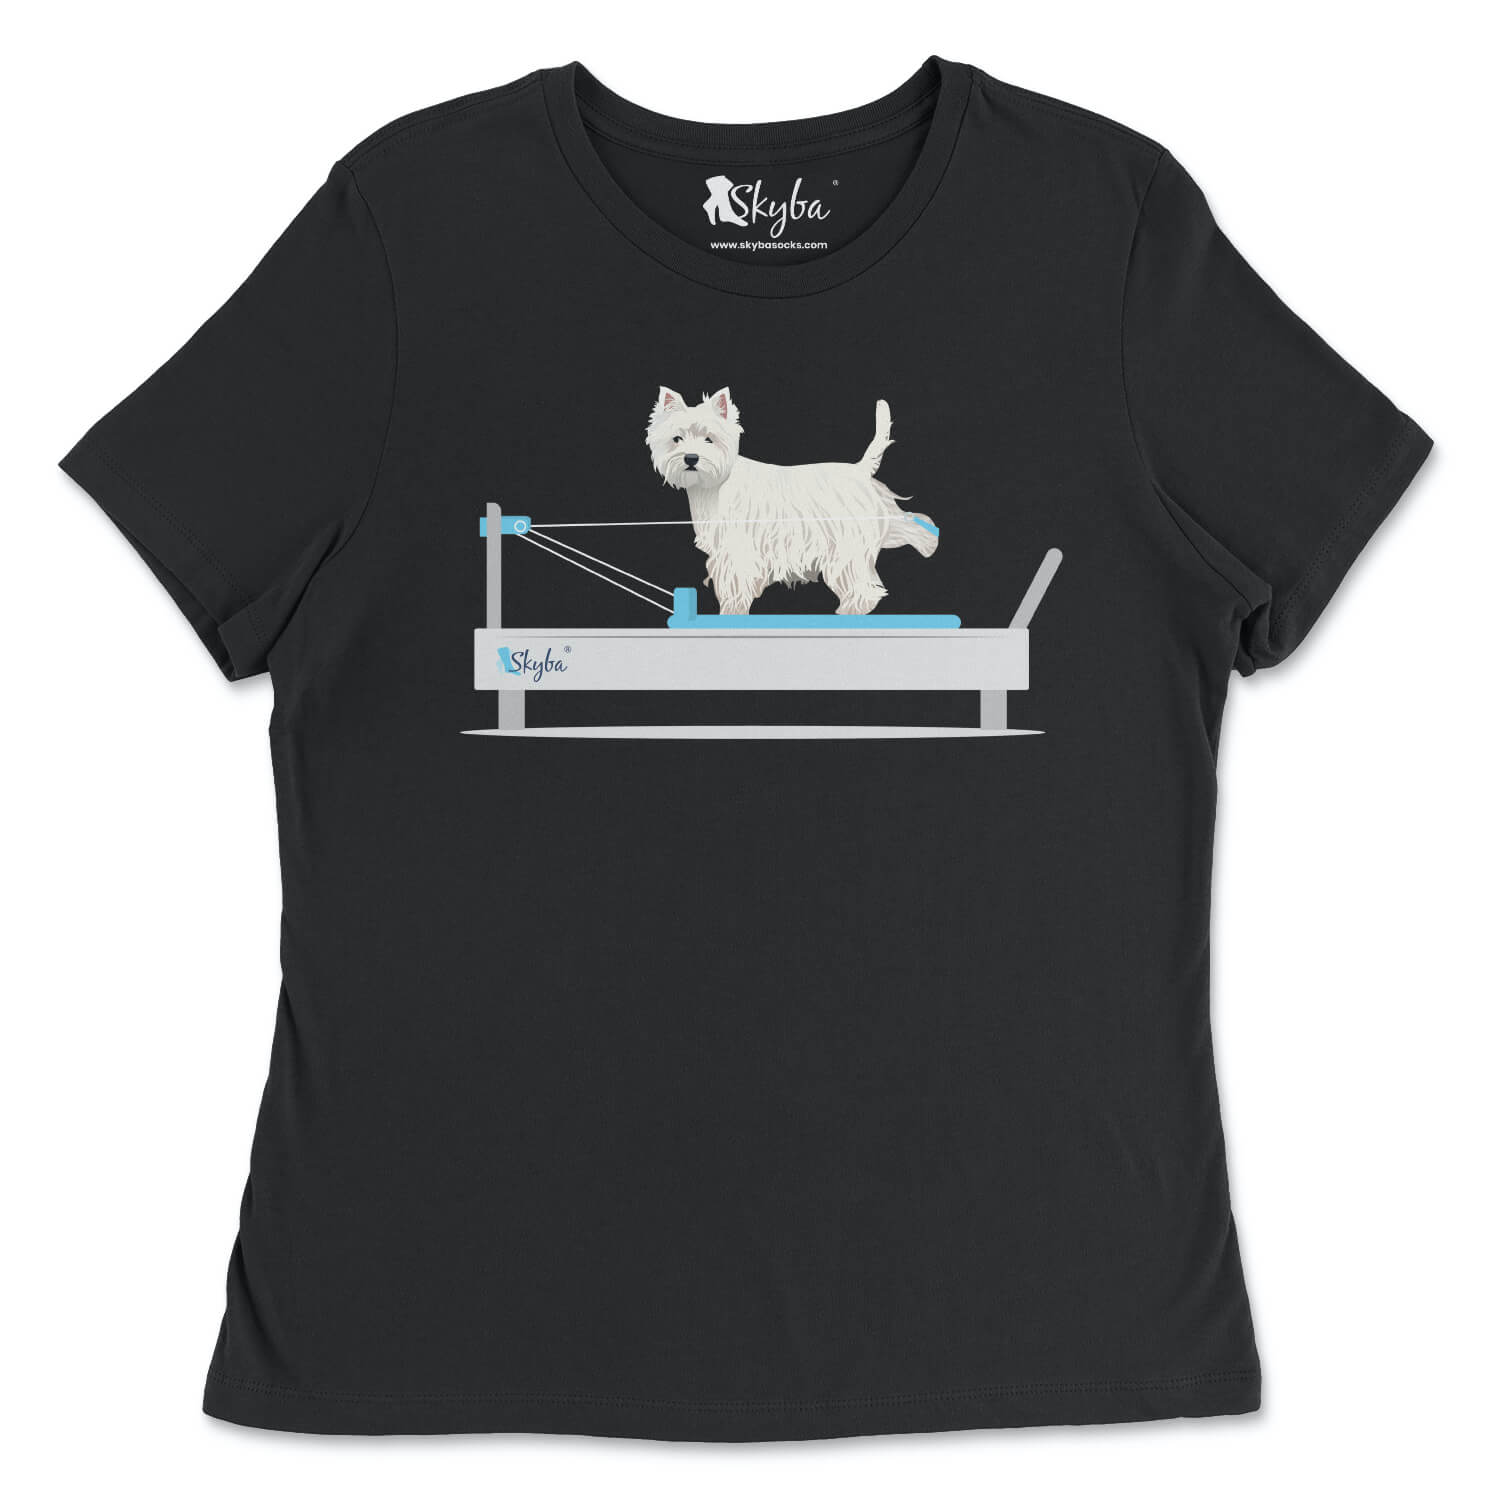 Westie on the Reformer - Classic Tee Skyba T-Shirt